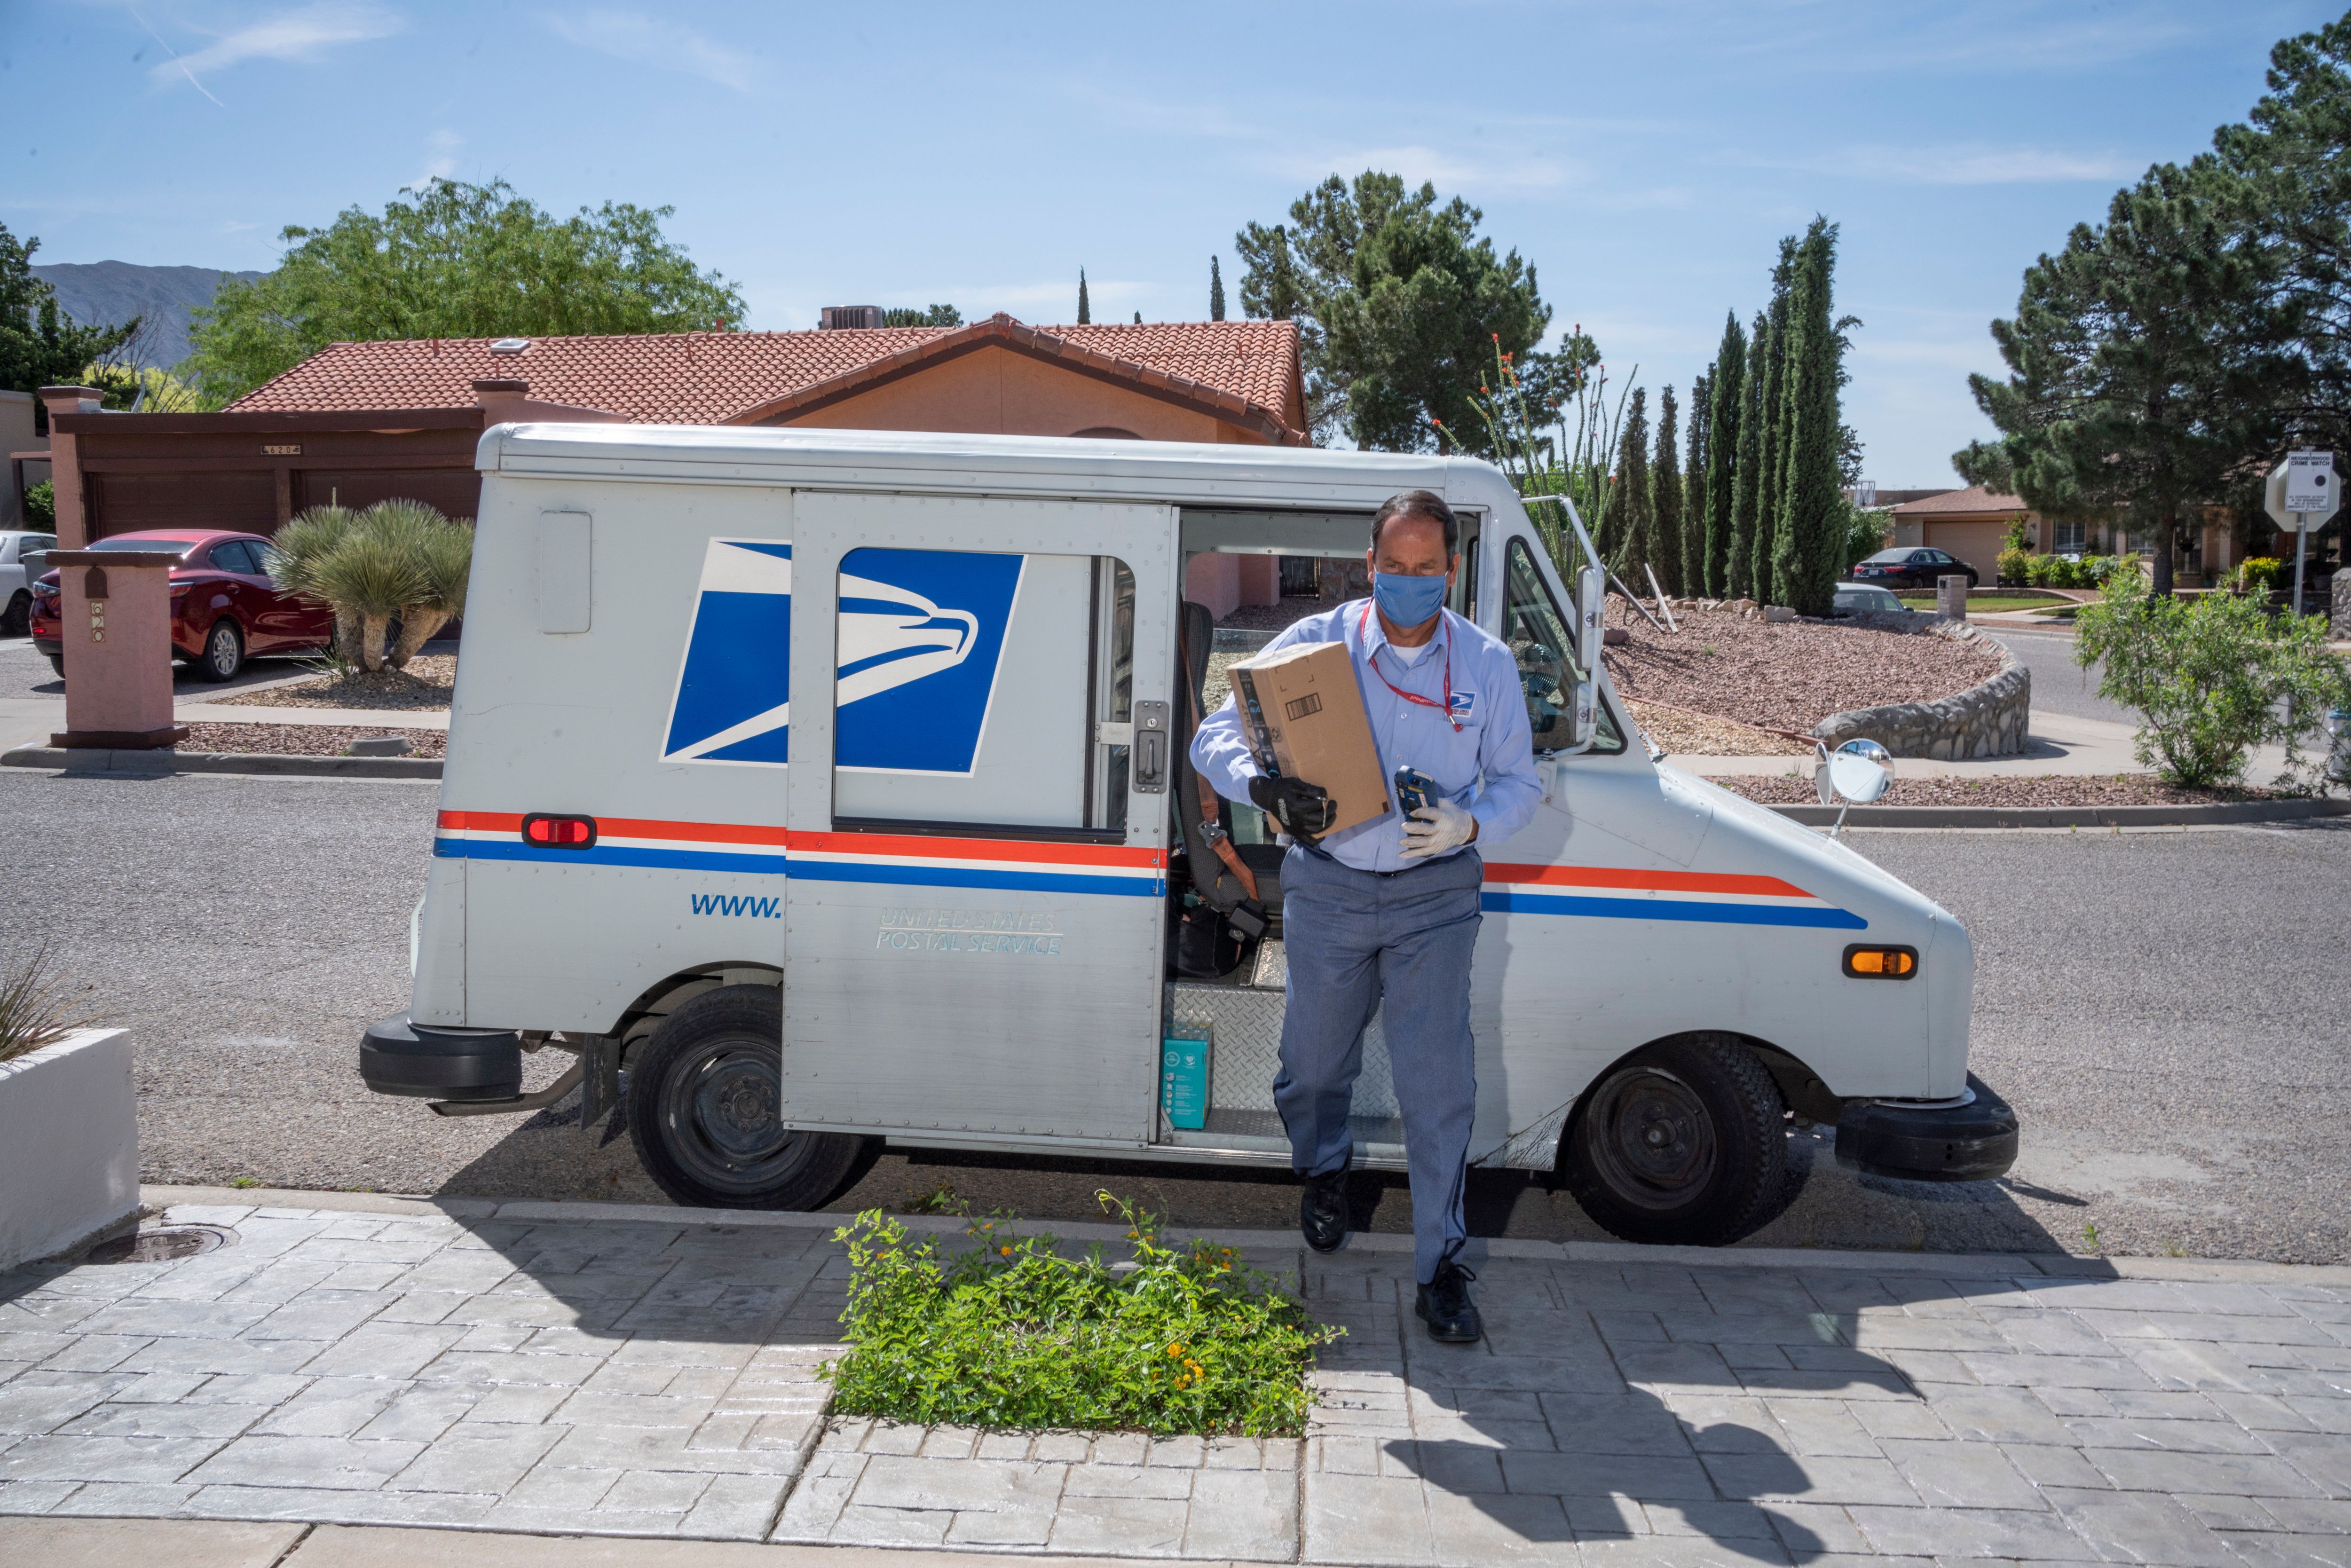 A postal employee carrying a package from their van.